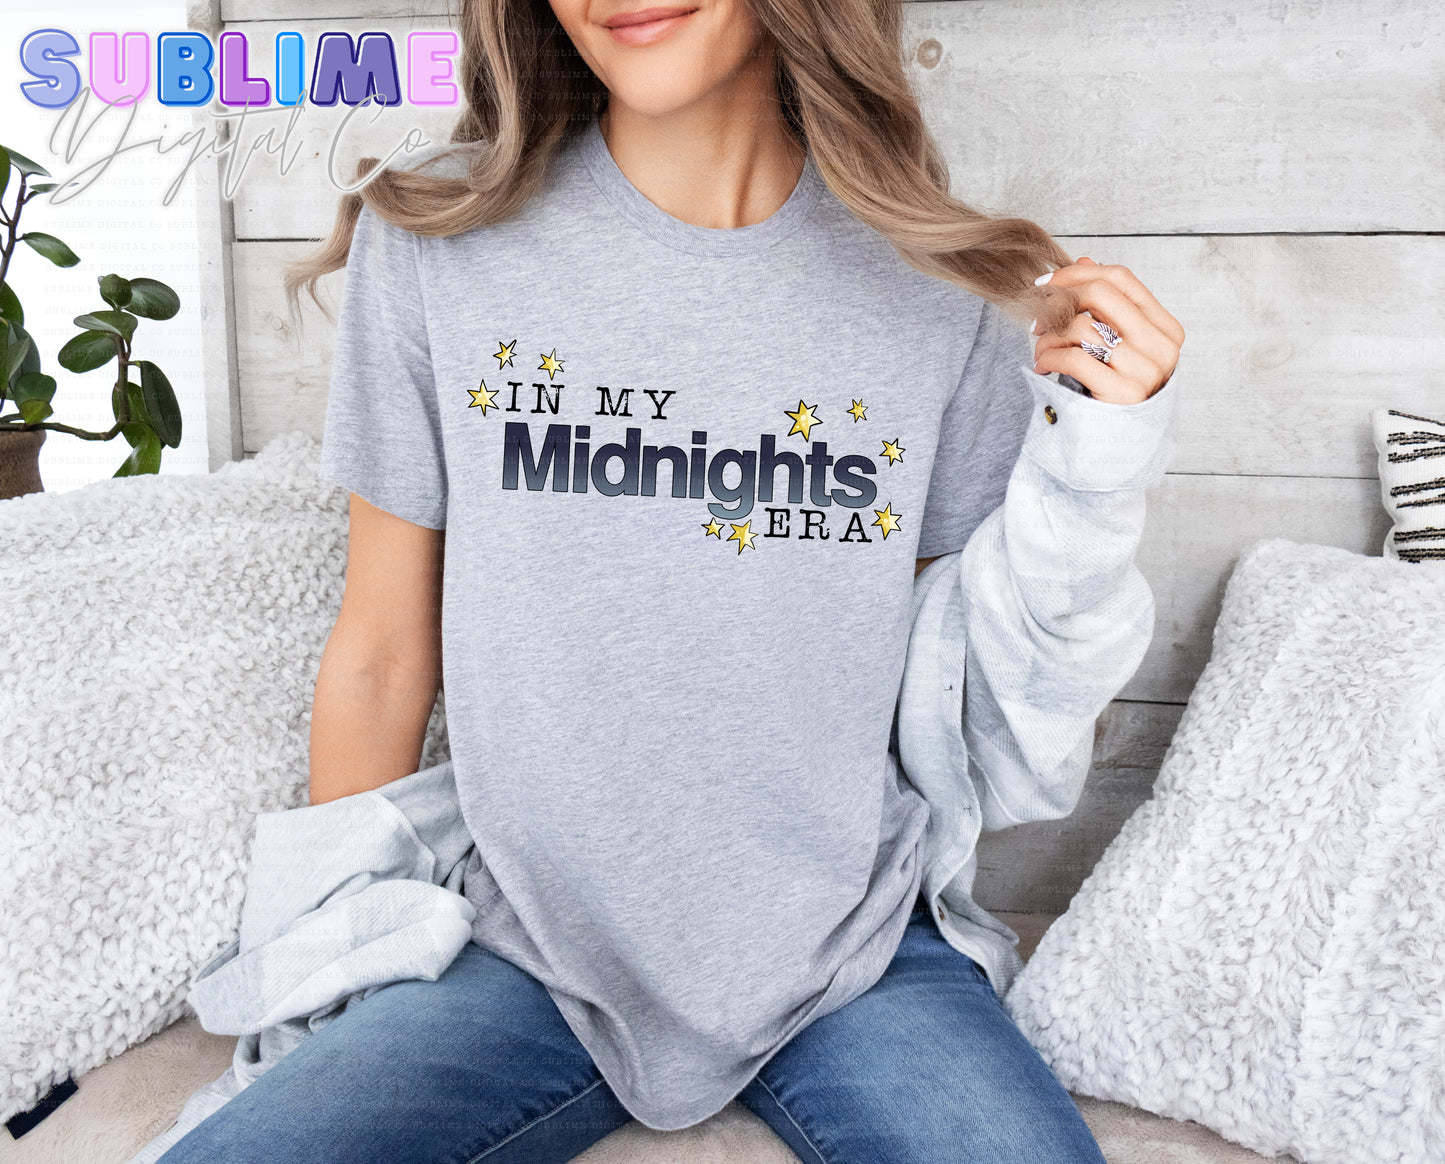 MidnightEra • Adult Apparel • Made to Order • TAT: Up To 21 Days